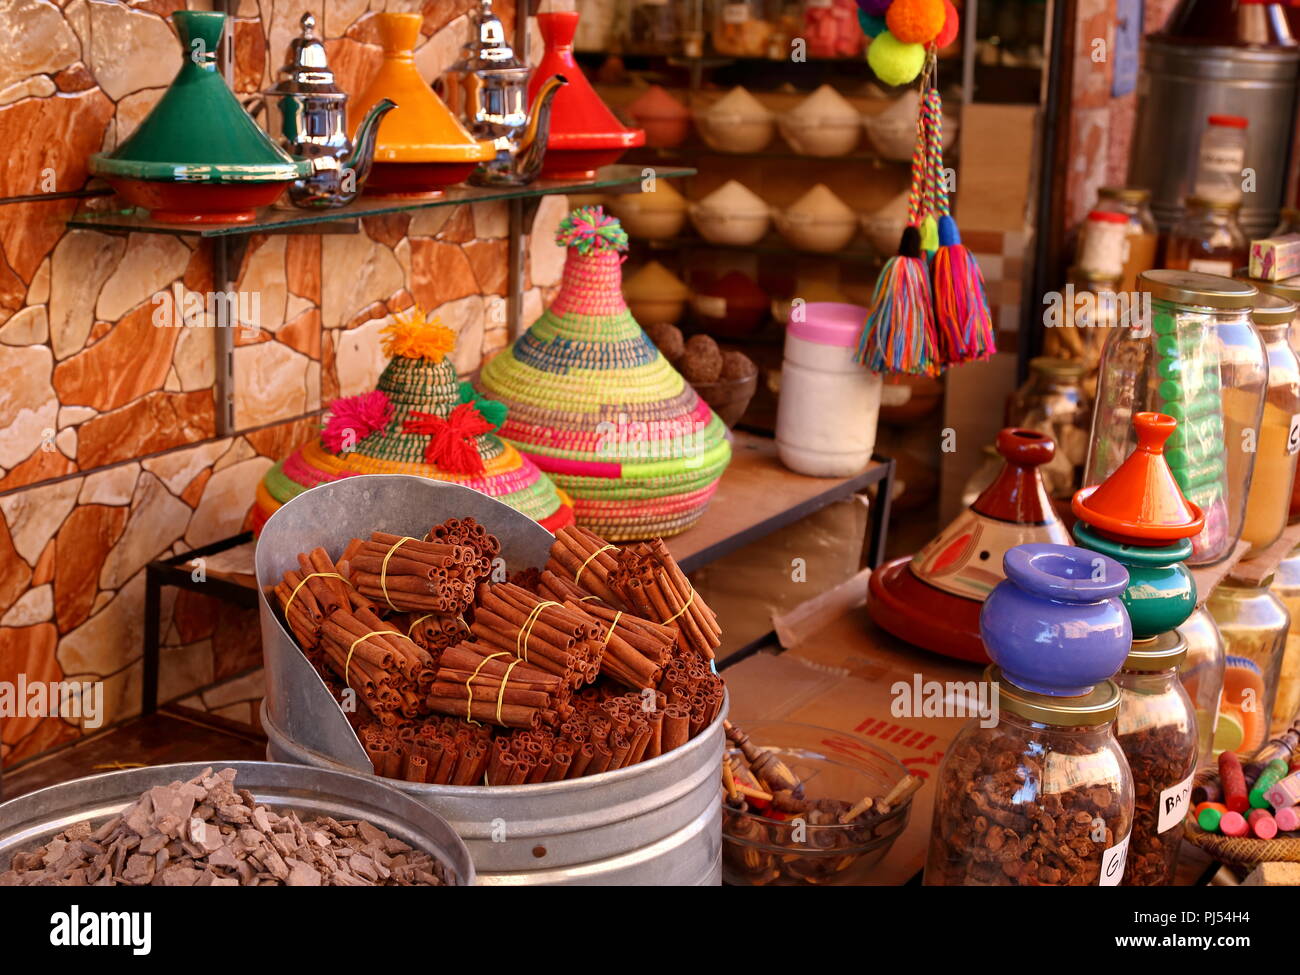 Colorfoul street market stand in Marrakech, Morocco, with cinnamon sticks, handicraft traditional souvenirs, typical dishes made of clay, cosmetics. Stock Photo